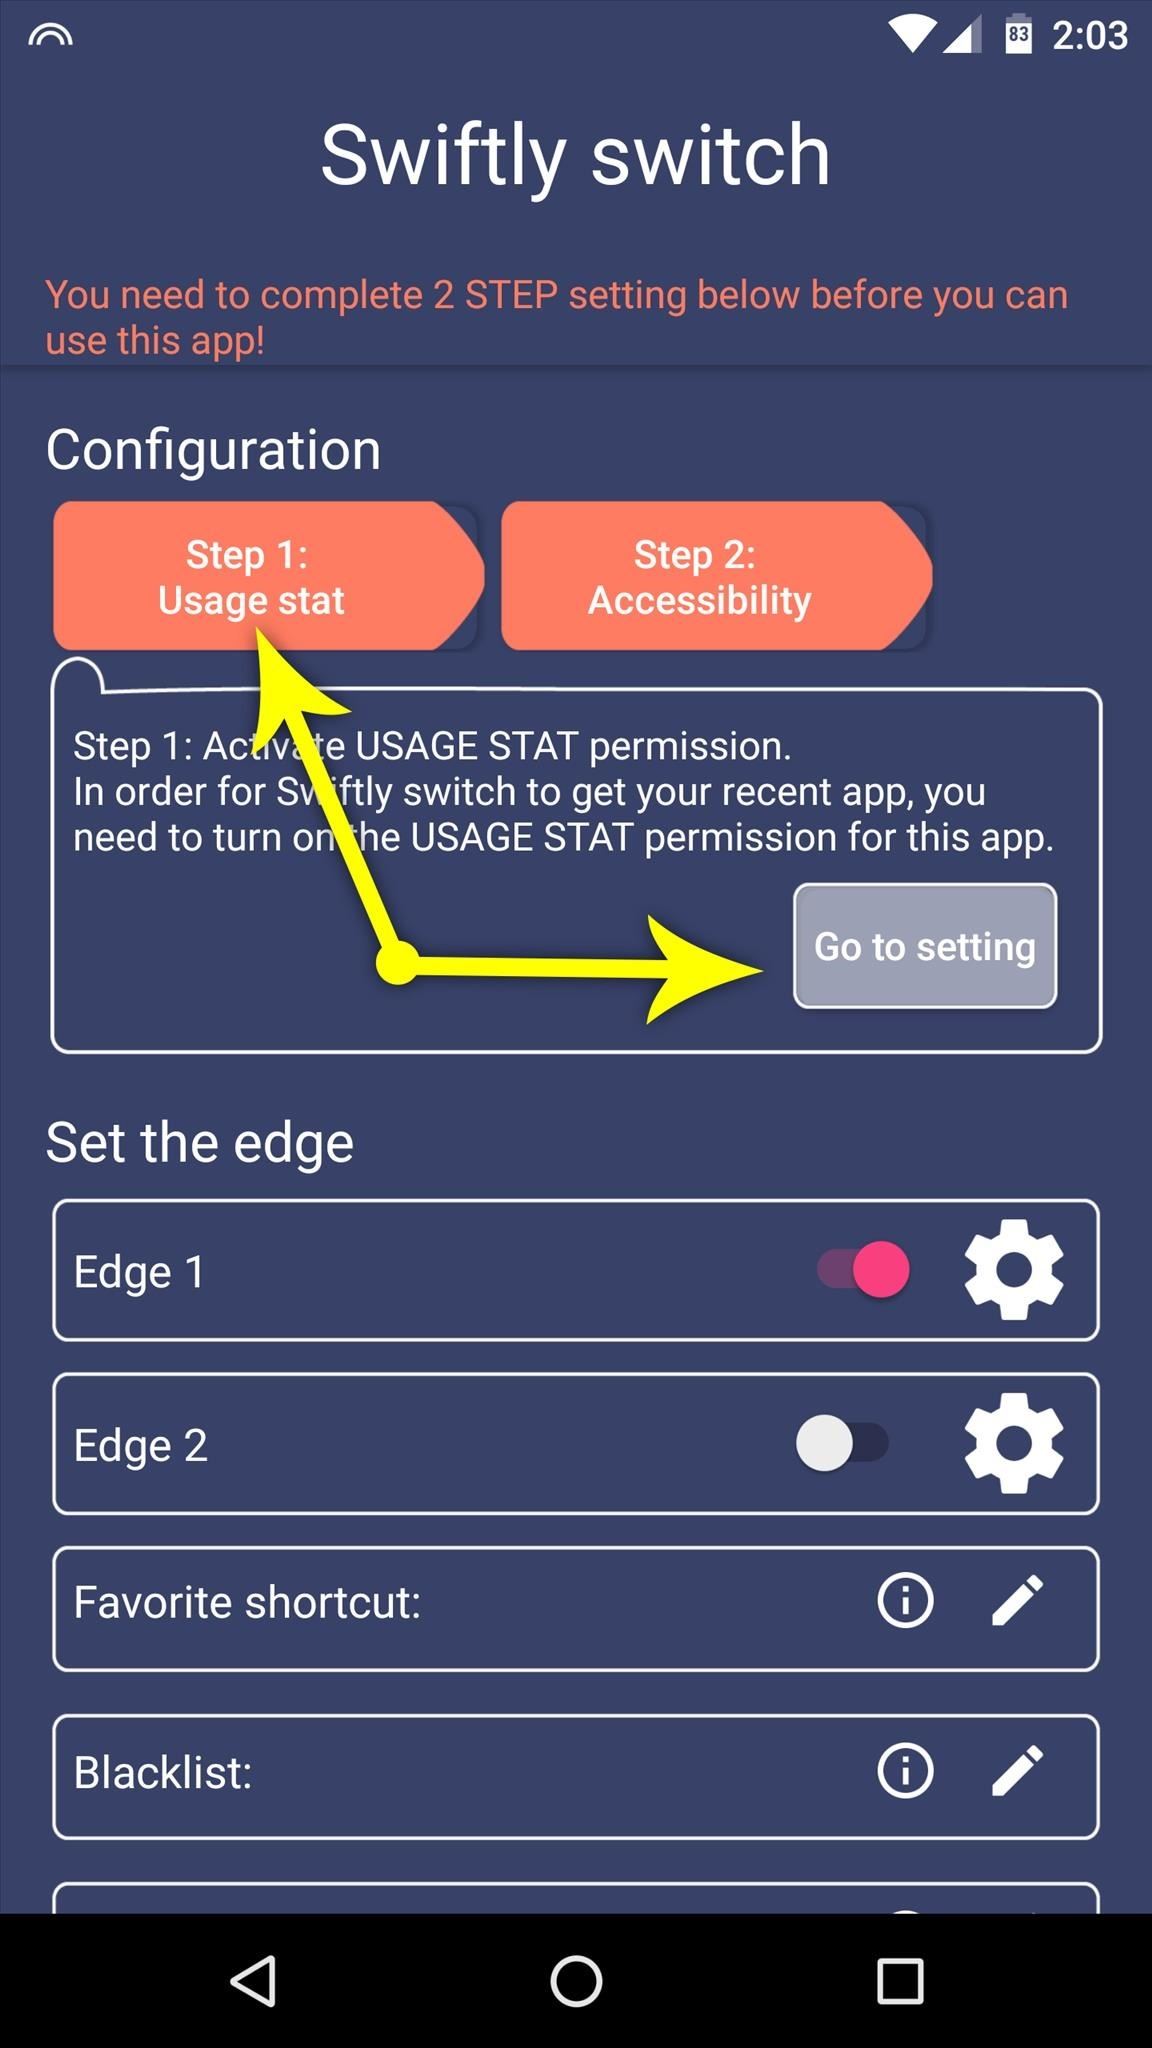 Launch Apps from the Side of Your Android Just Like the Galaxy Edge